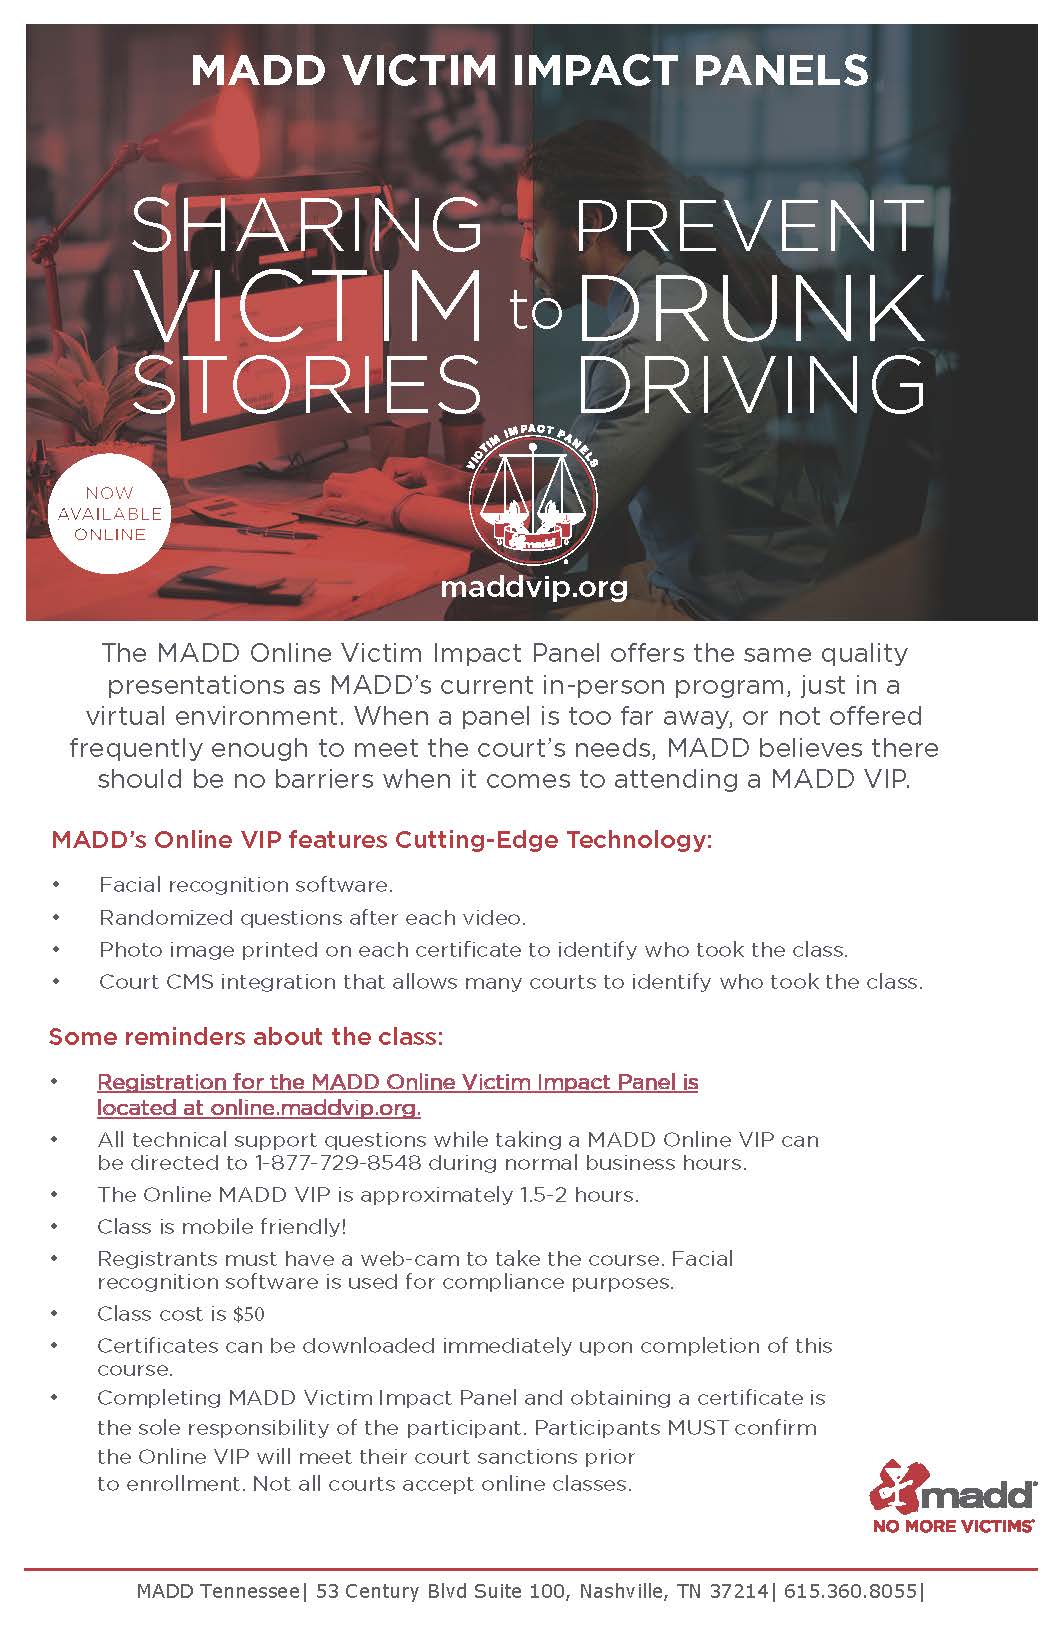 Online Victim Impact Panel (VIP) Info for MADD Tennessee Affiliate